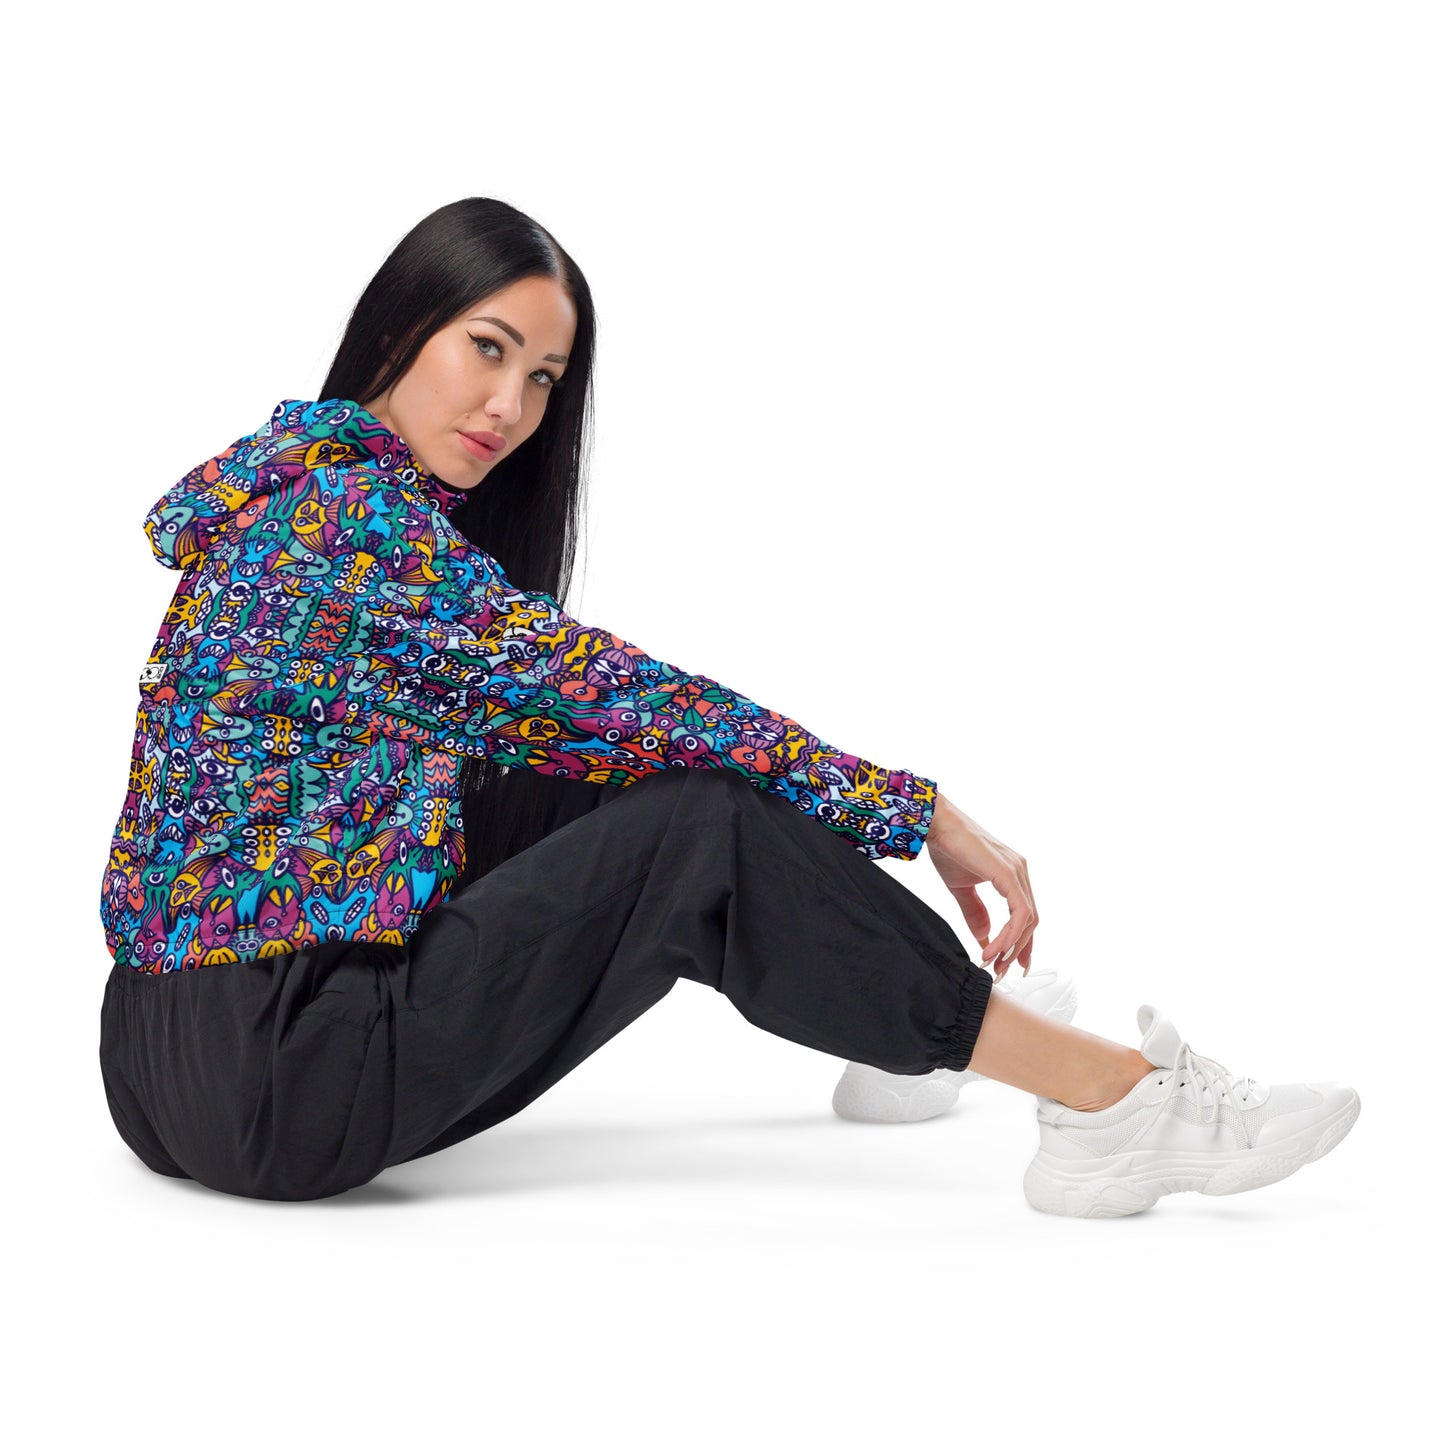 Whimsical design featuring multicolor critters from another world Women’s cropped windbreaker. Lifestyle